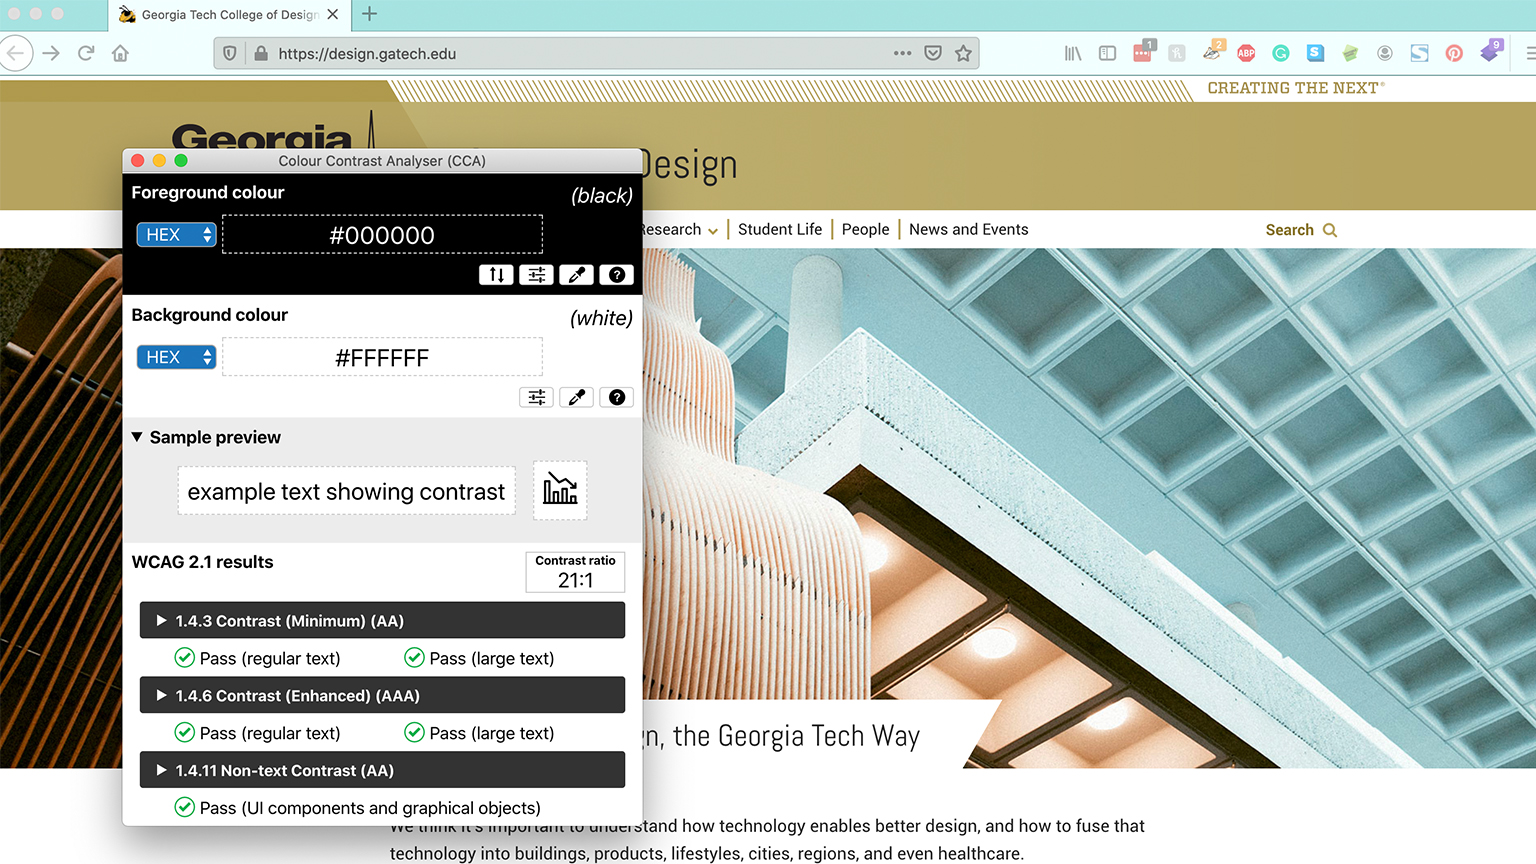 A screenshot showing the College of Design homepage and a color contrast analyzer application.